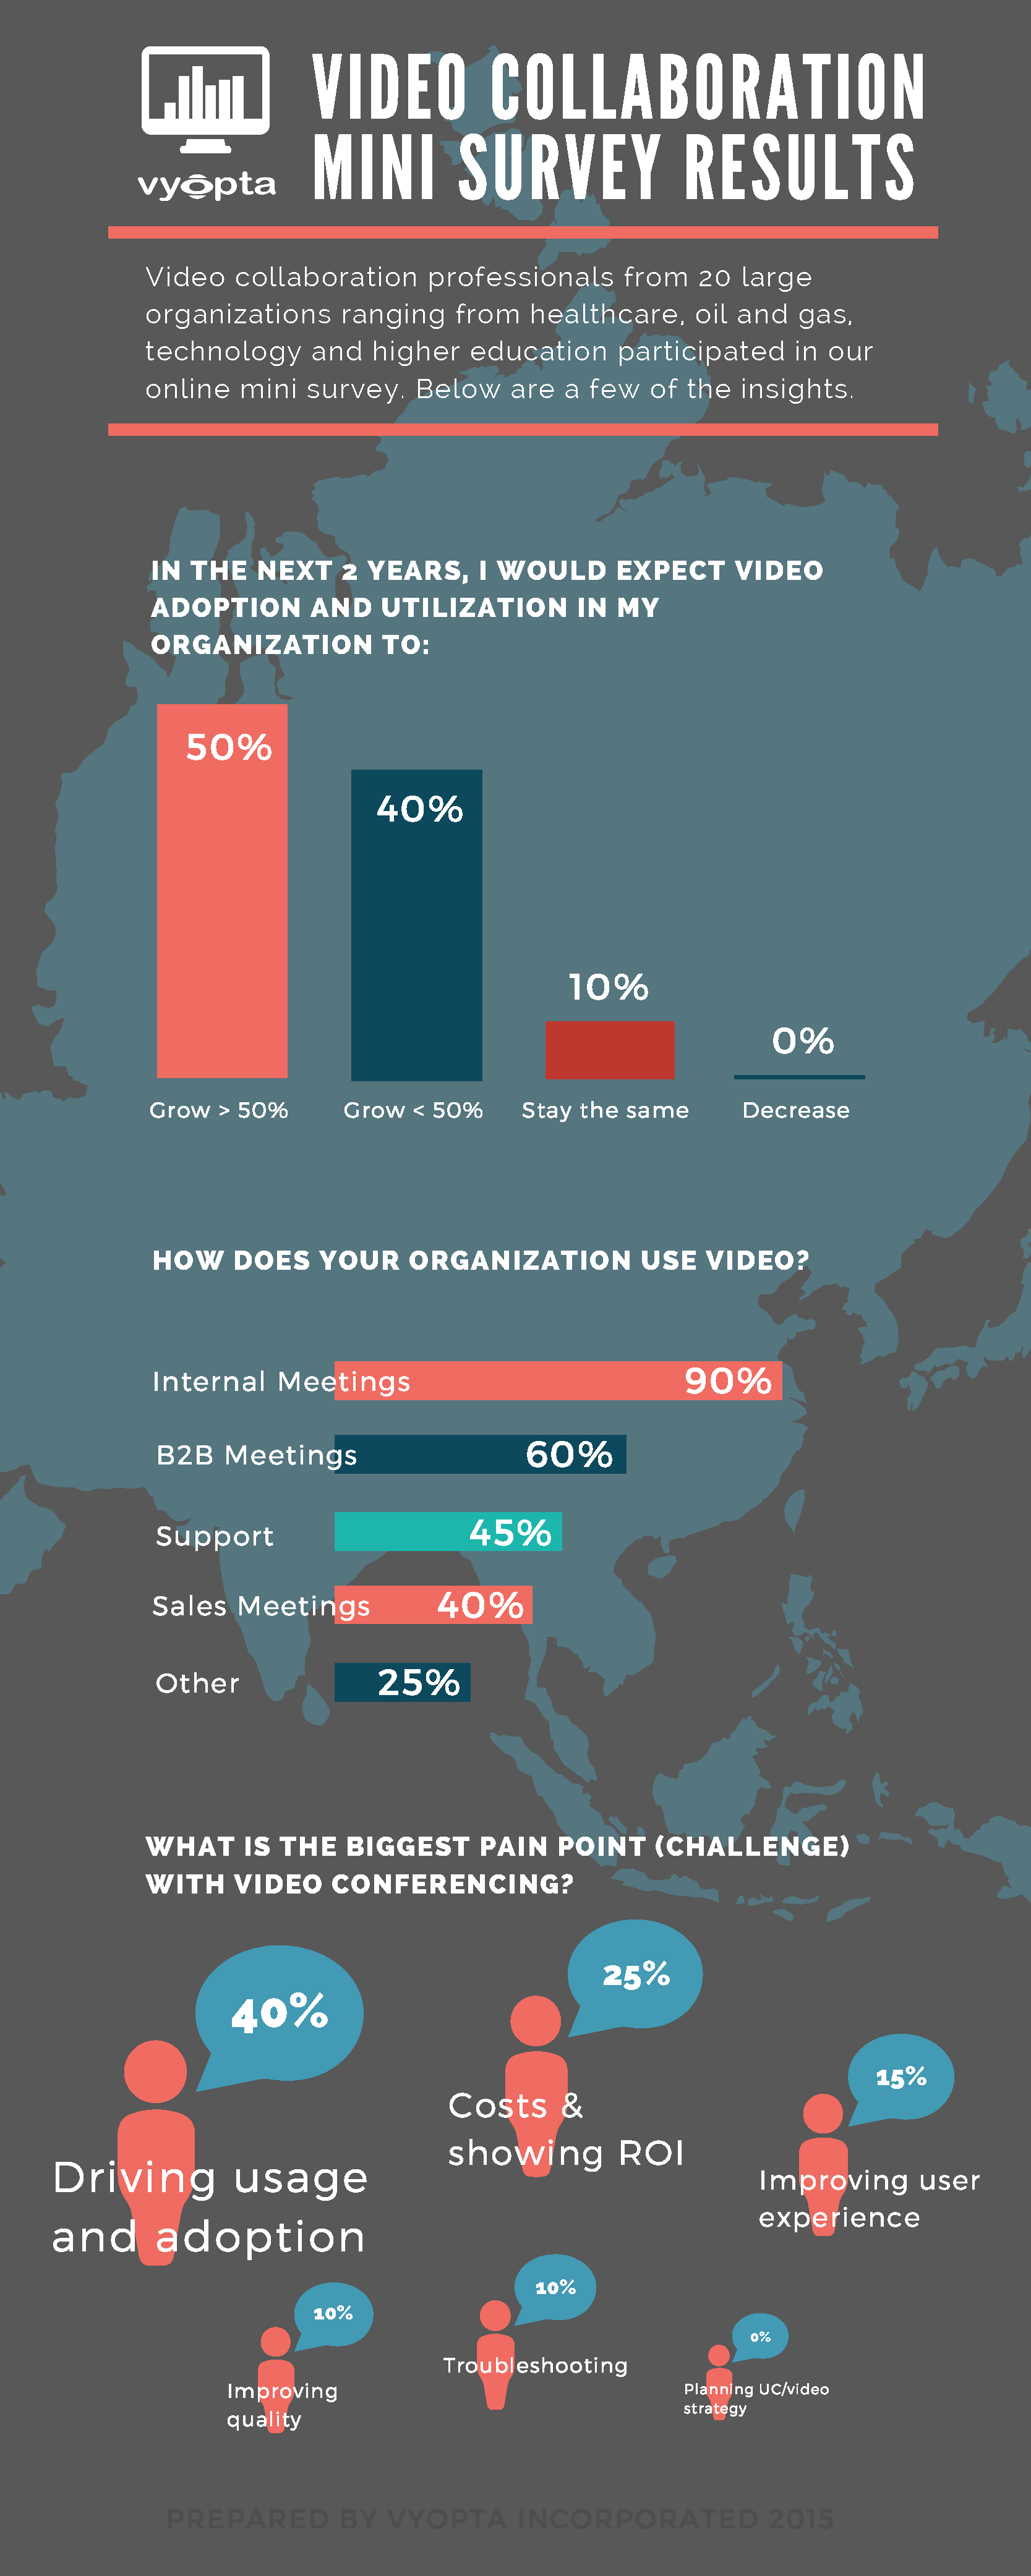 Video conferencing survey results and predictions 